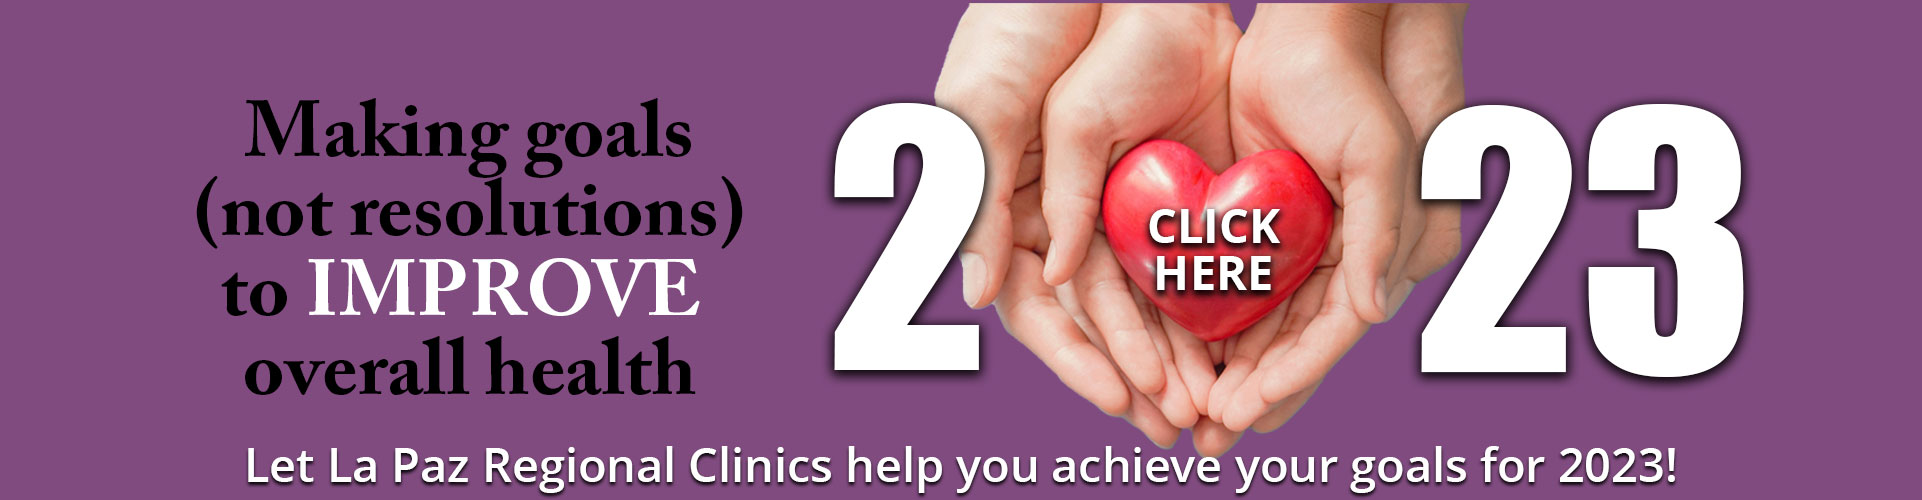 Pictured is a hands holding a heart. Banner says Making goals (not resolutions) to Improve overall health.
Let La Paz Regional Clinics help you achieve your goals for 2023!